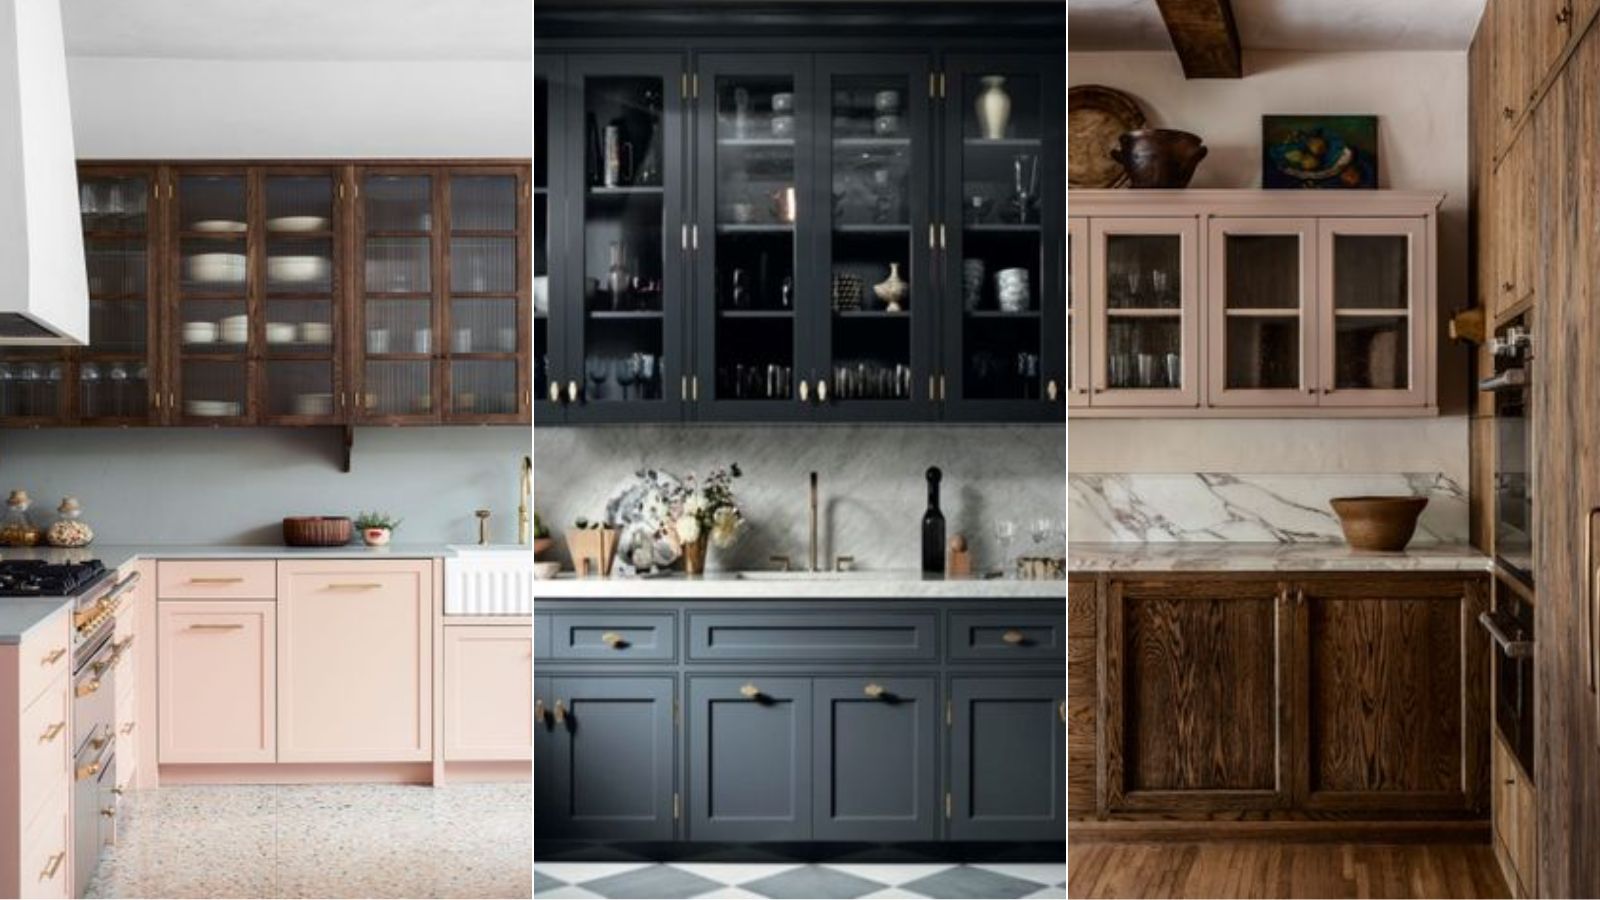 4 Options to Increase the Functionality of Your Blind Corner Cabinet